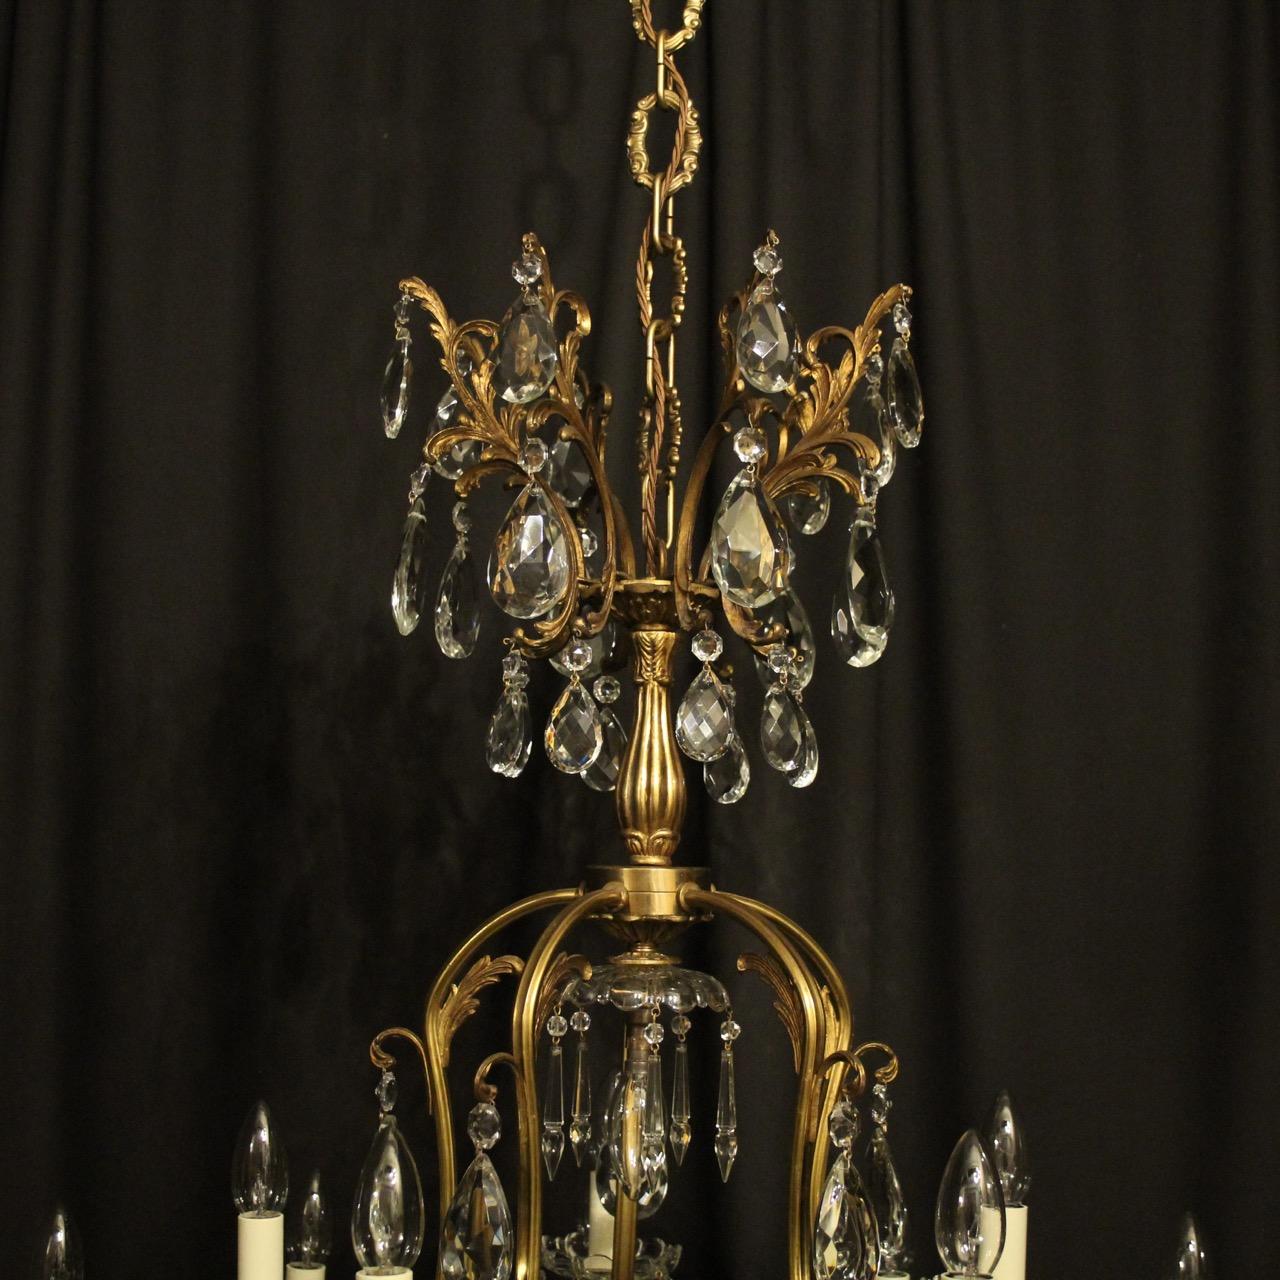 20th Century French Gilded Birdcage Antique Chandelier